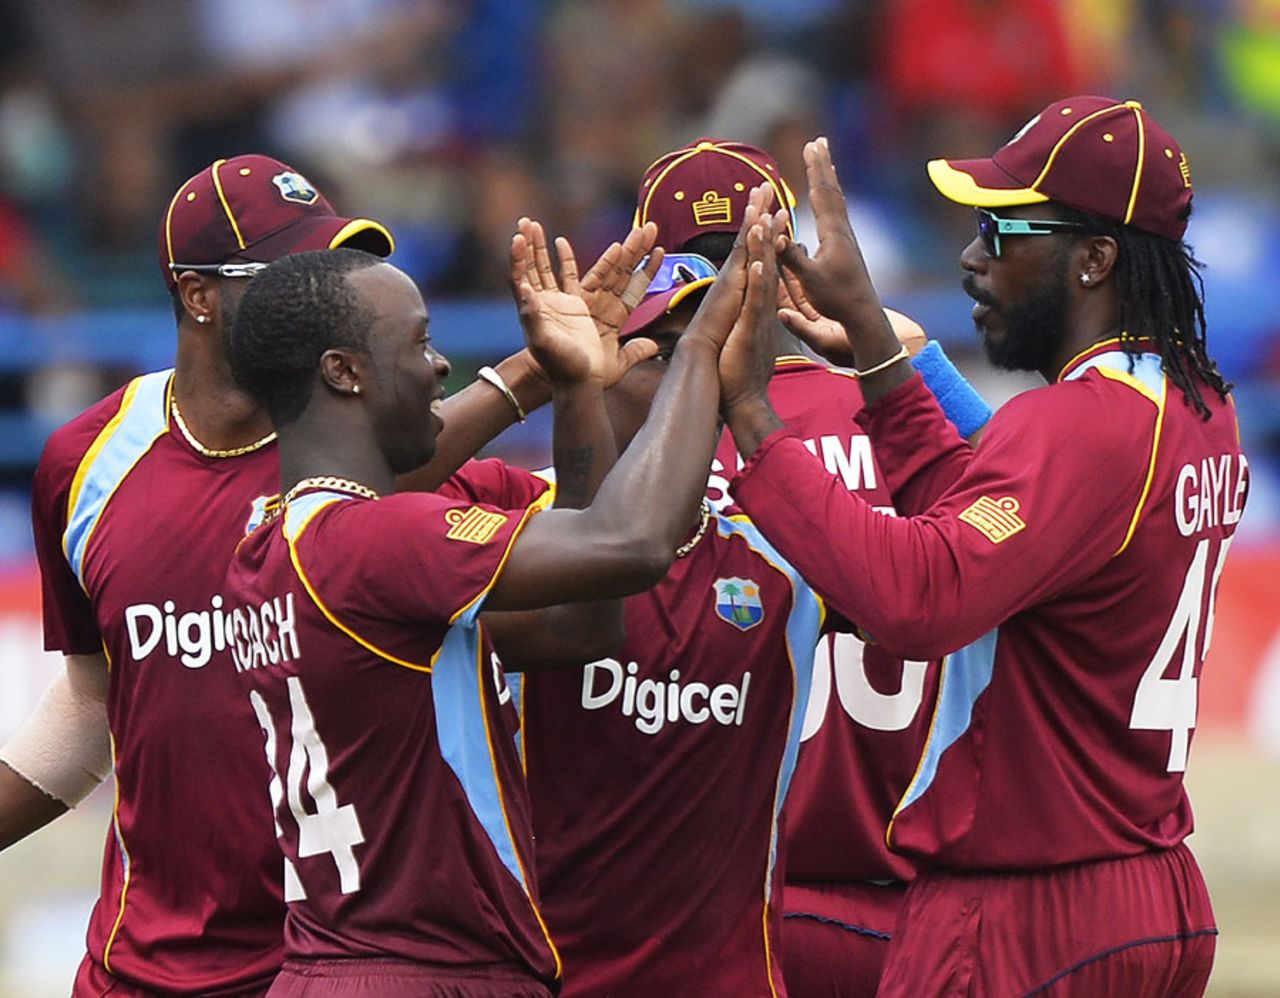 Kemar Roach celebrates the wicket of Shikhar Dhawan, West Indies v India, West Indies tri-series, Port of Spain, July 5, 2013